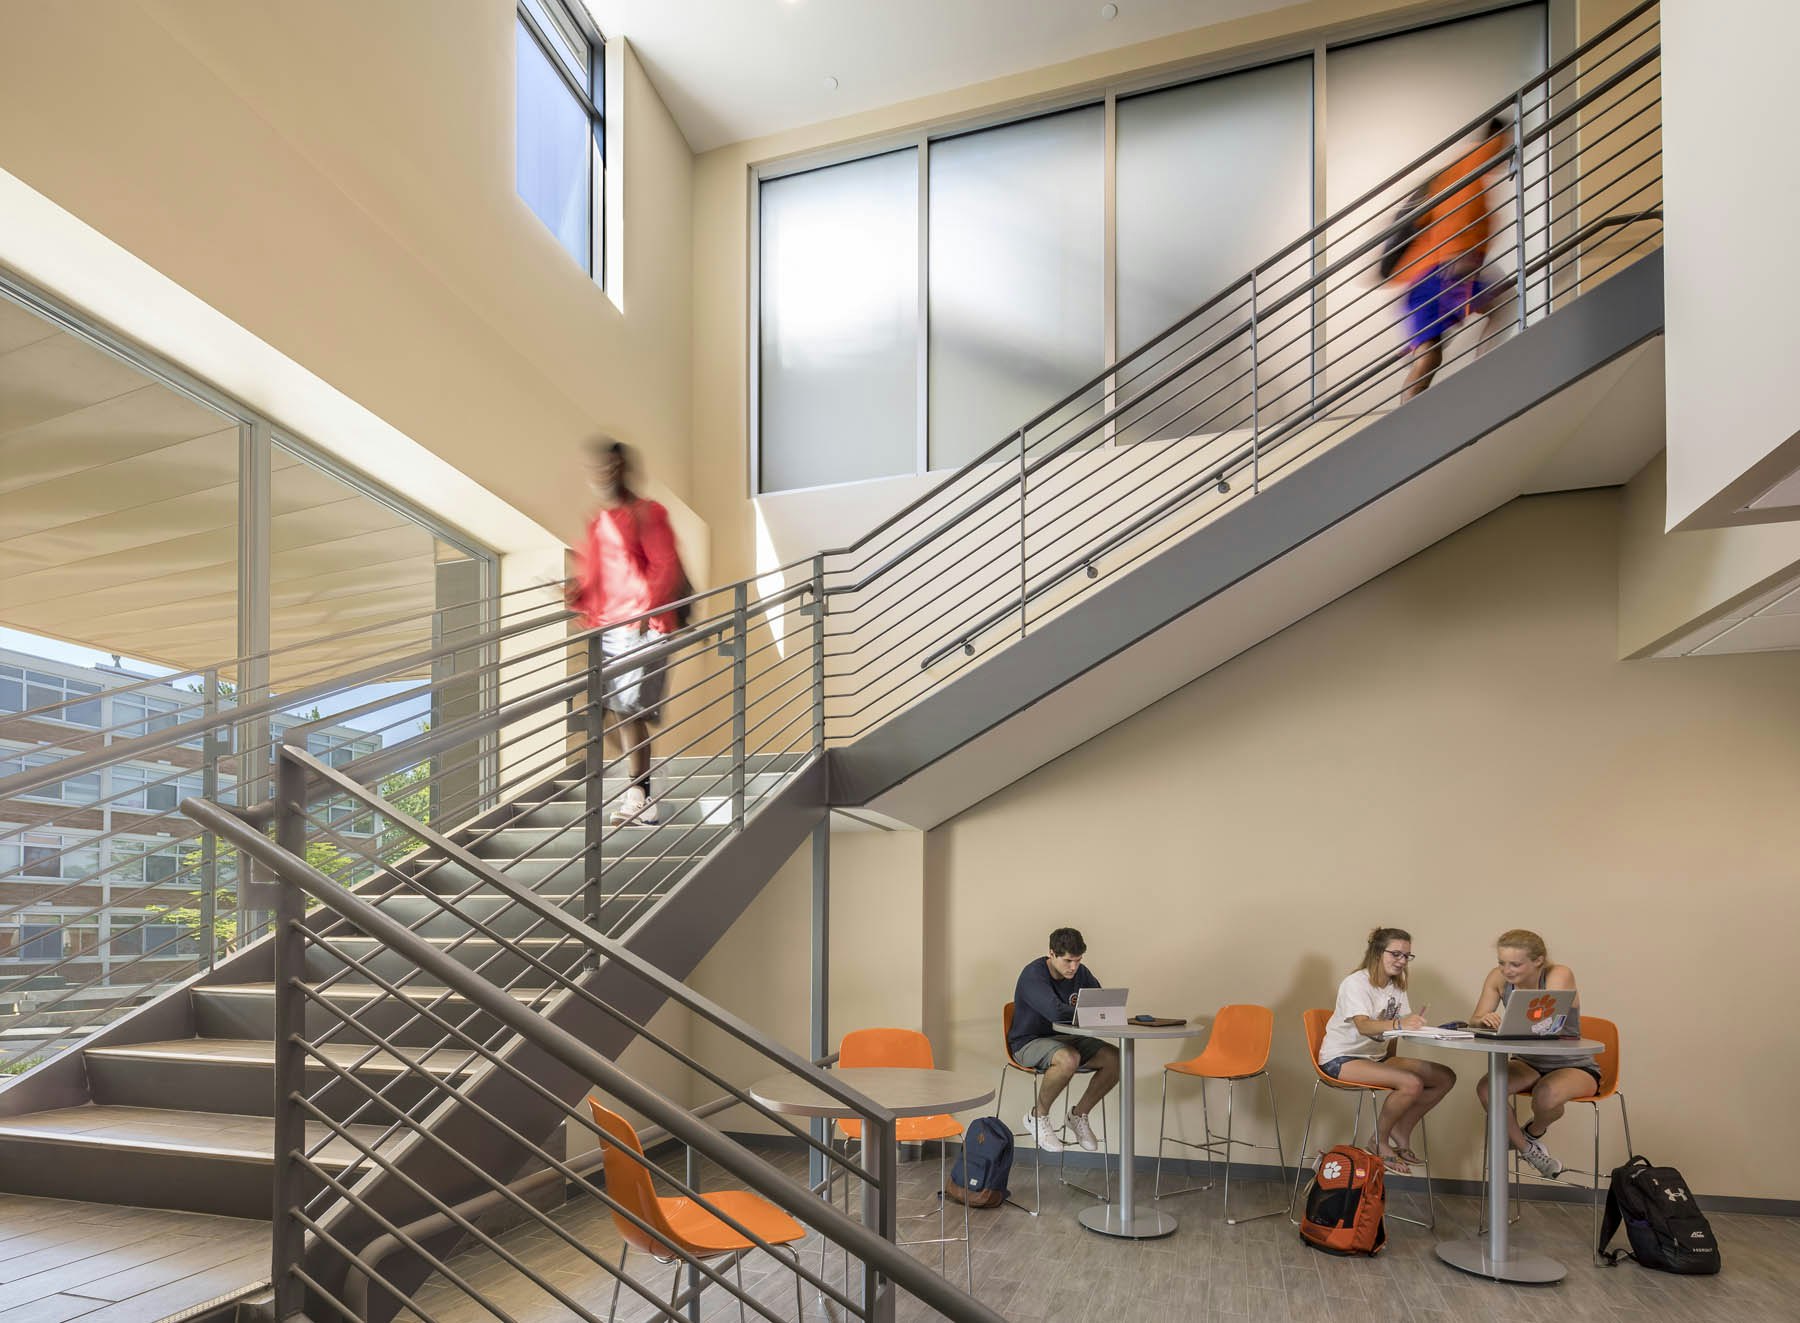 The design strategy balanced building and landscape through tree-lined parkways, residential courtyards, shady café terraces, and lawn areas. Landscape divides and joins program space, creating a dynamic center for student activity. 